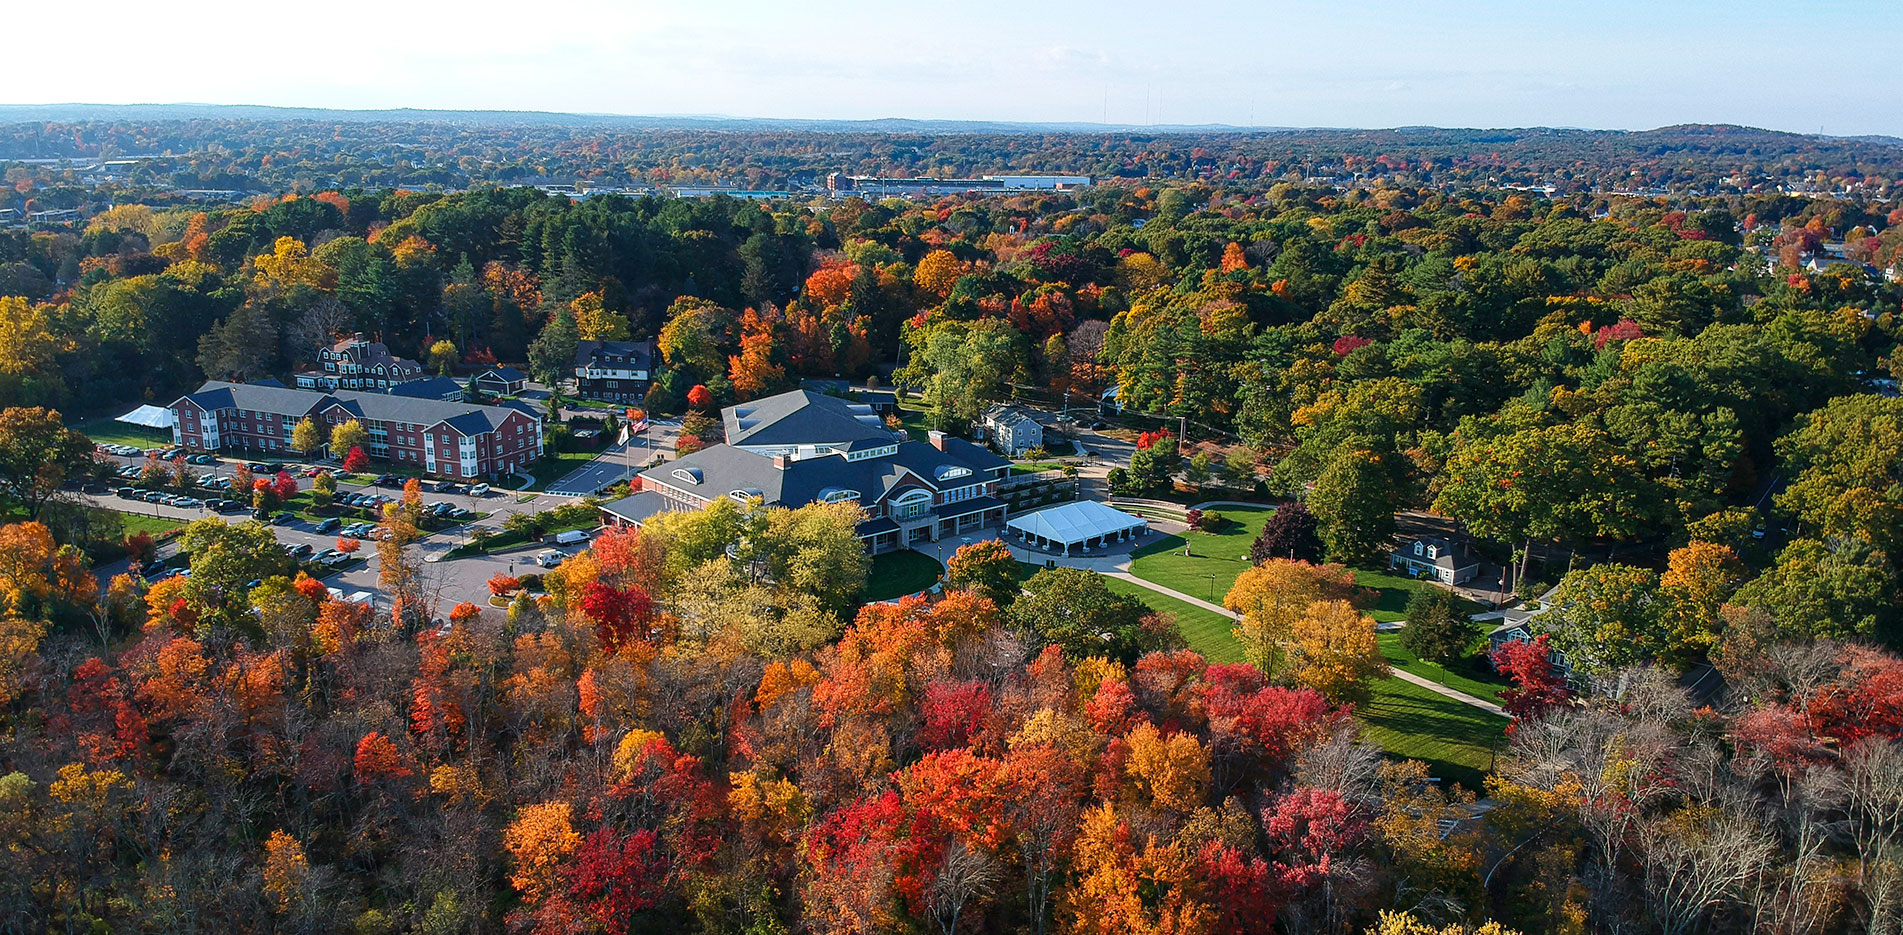 The Curry College campus is shown from above in autumn